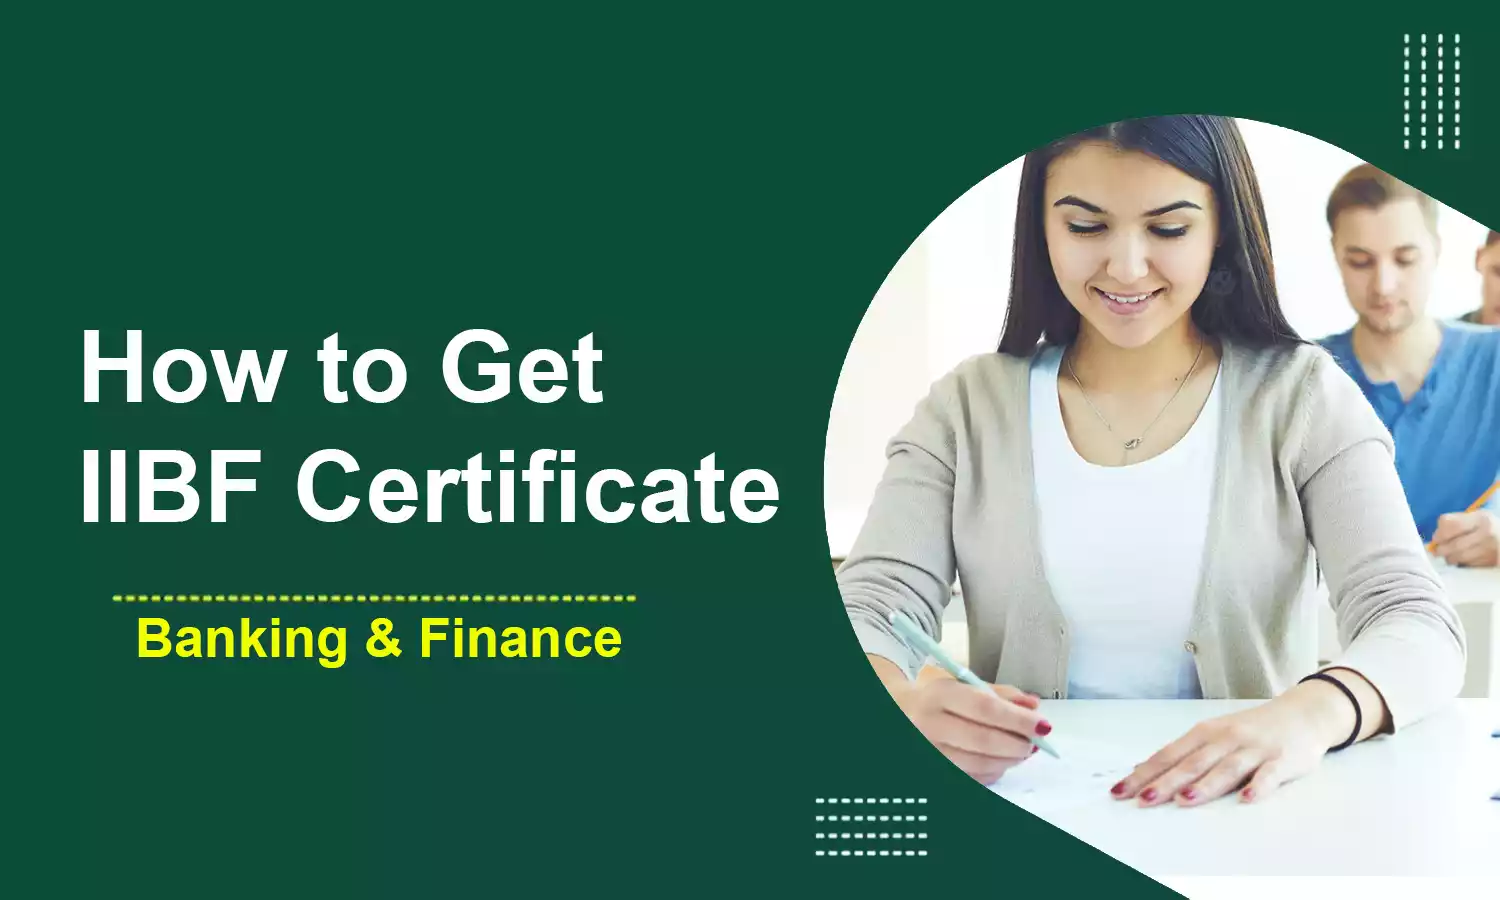 How to Get IIBF Certificate for Banking & Finance